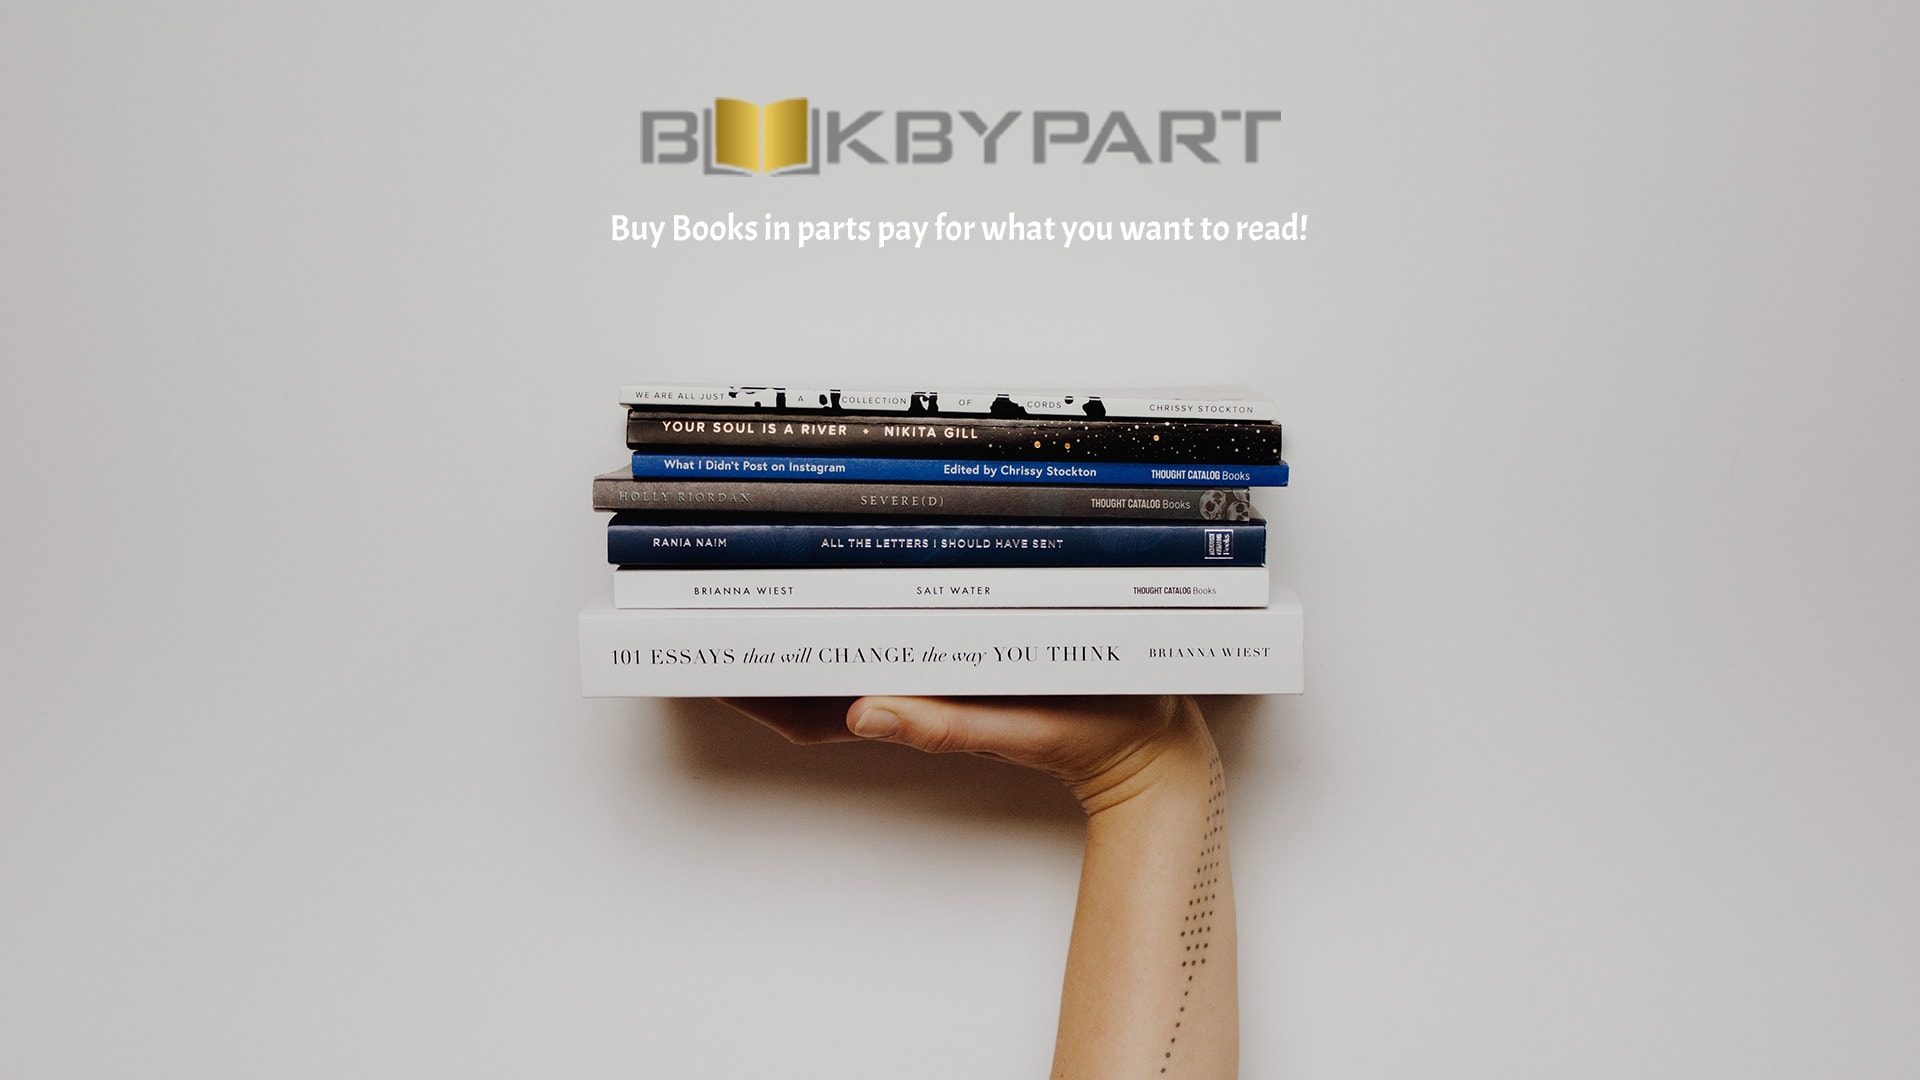 BooksByParts - Buy books in parts